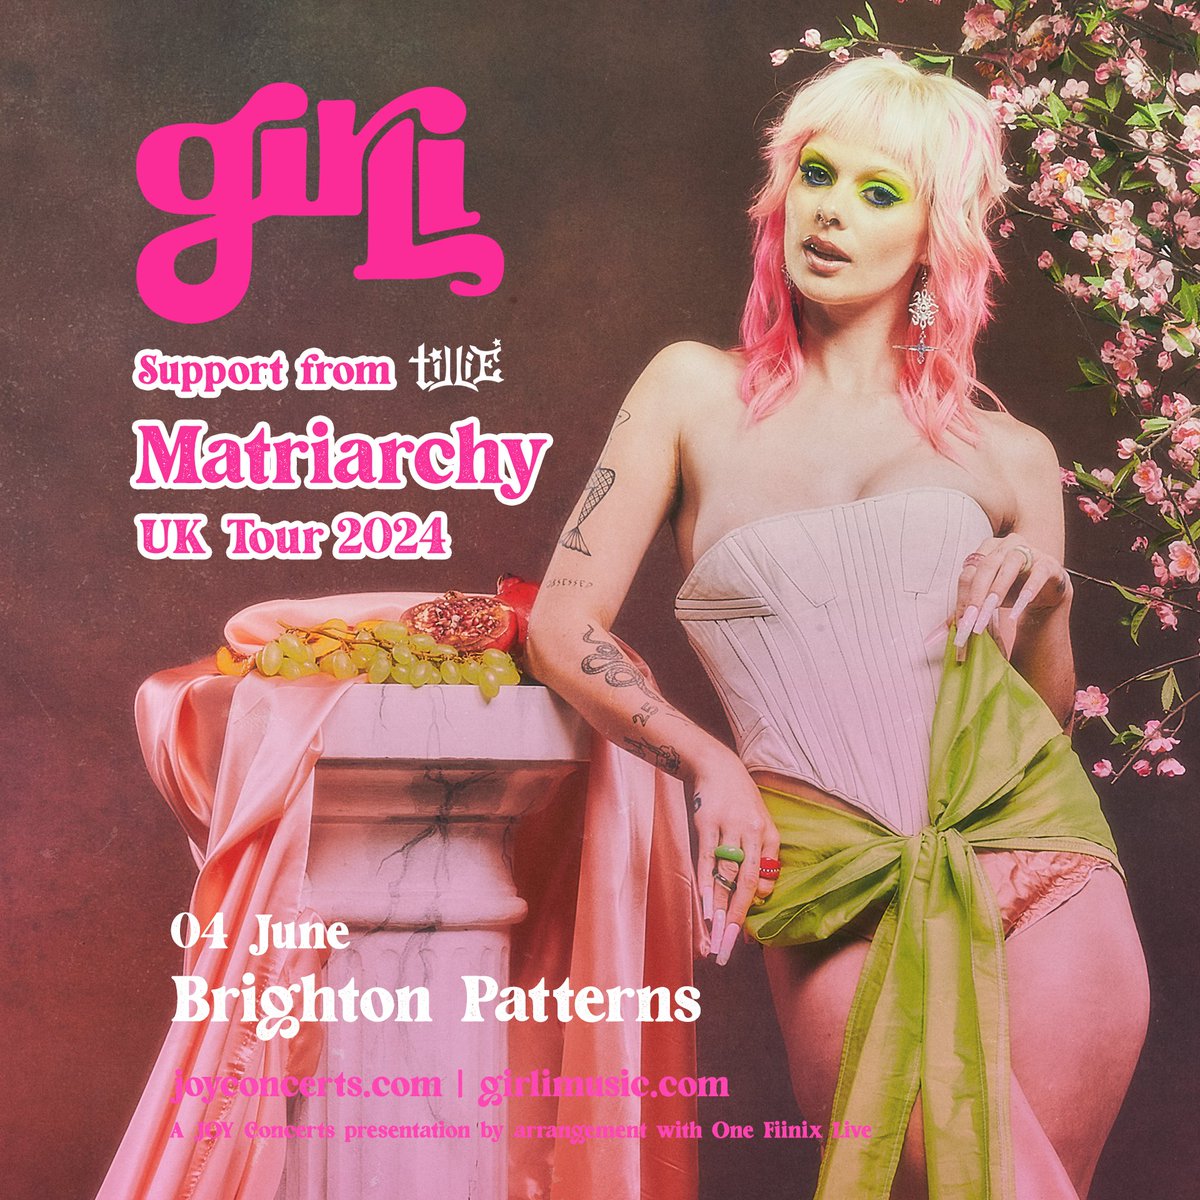 SUPPORT ANNOUNCEMENT @whoistillie for @girlimusic at Patterns this June! 🎟 tiLLie is a genre-defying artist self-categorizing her music as “Nightmare Pop,” 🎟 Tickets still available bit.ly/4757VCt